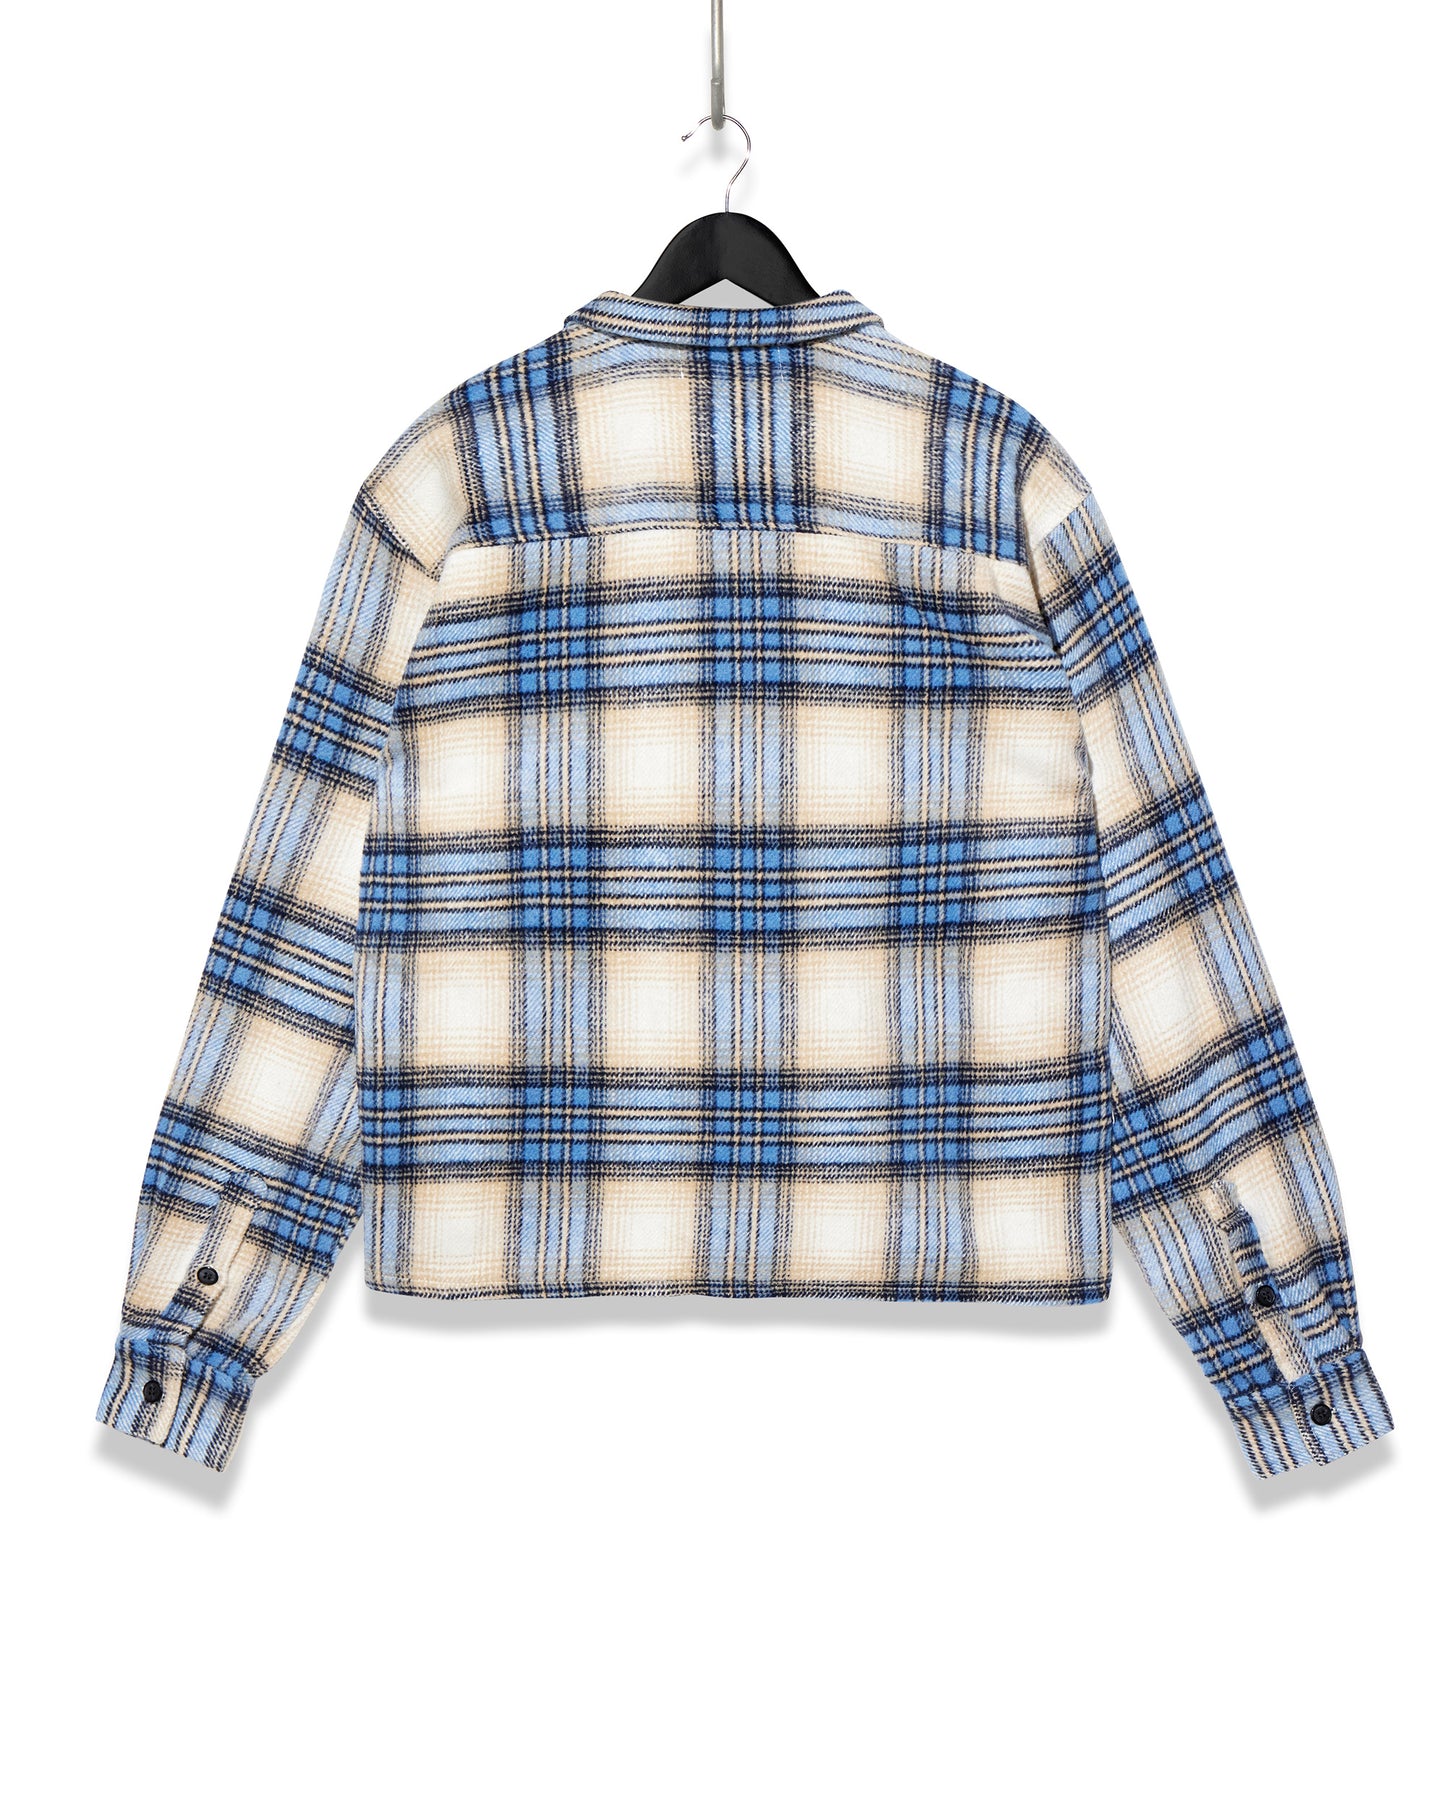 SKY FLANNEL